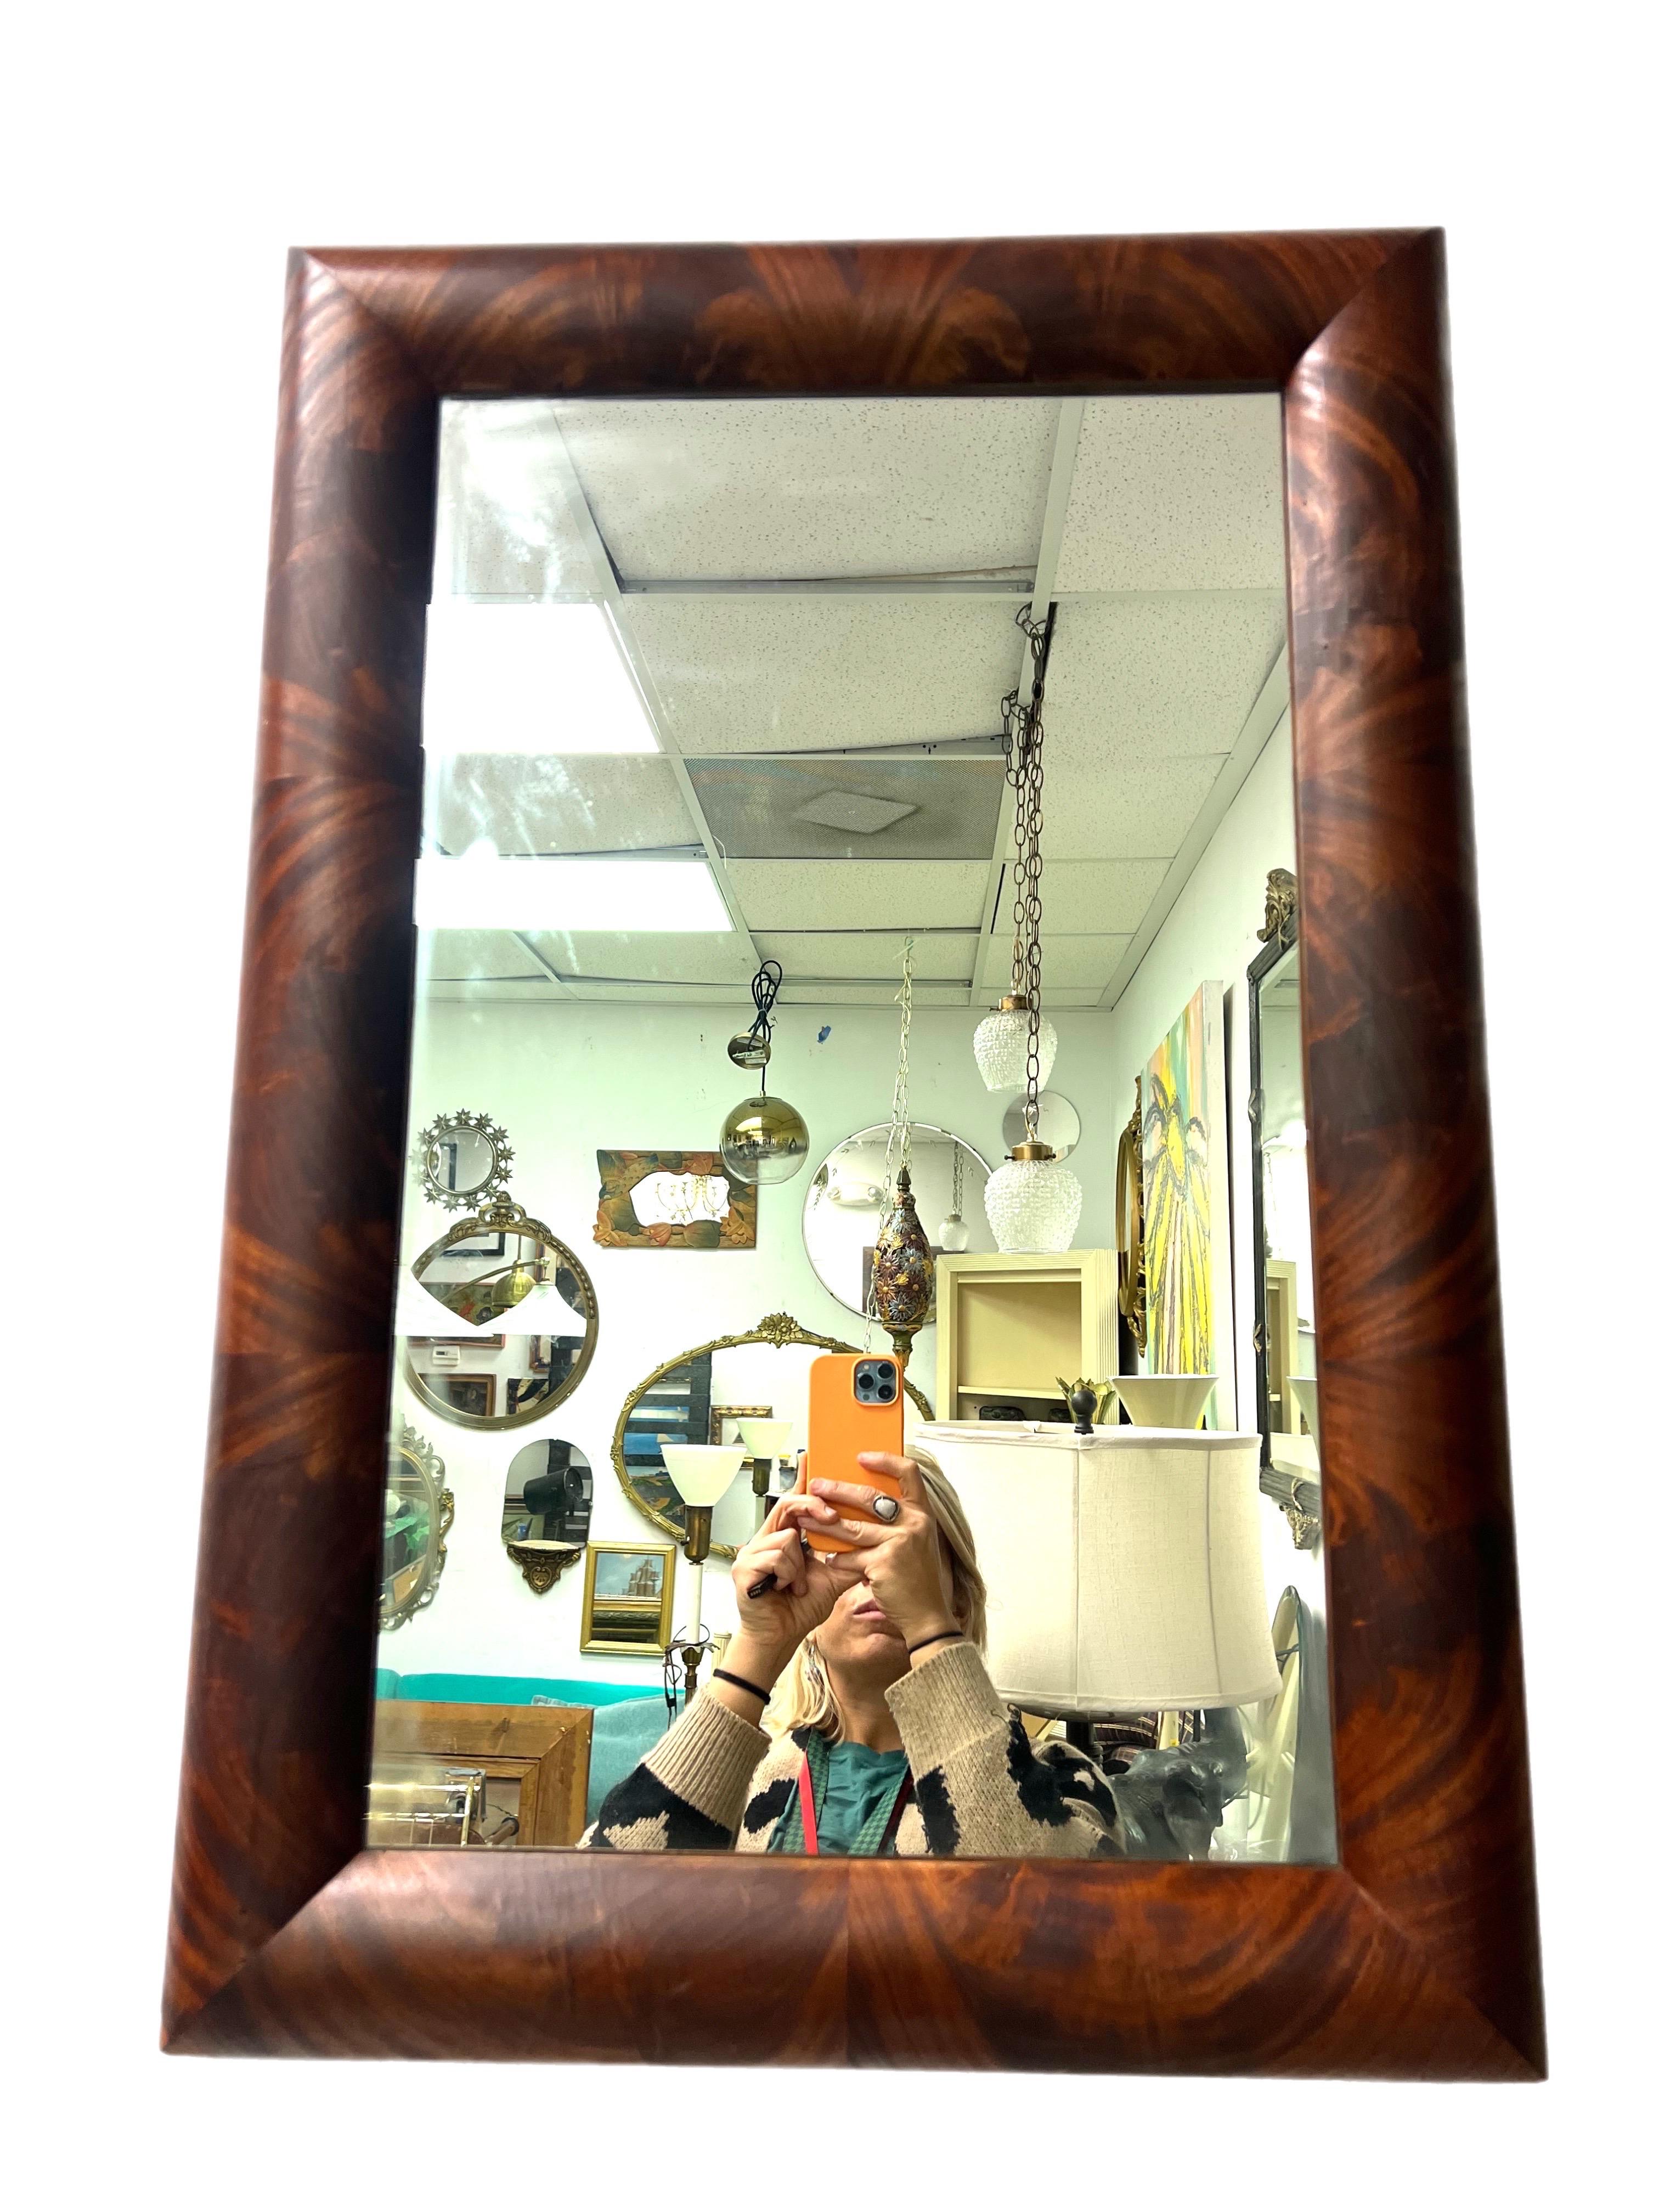 An absolutely stunning and handsome flame mahogany framed mirror. This would look great and add warmth and masculinity to any decor. Circa late 19th century.